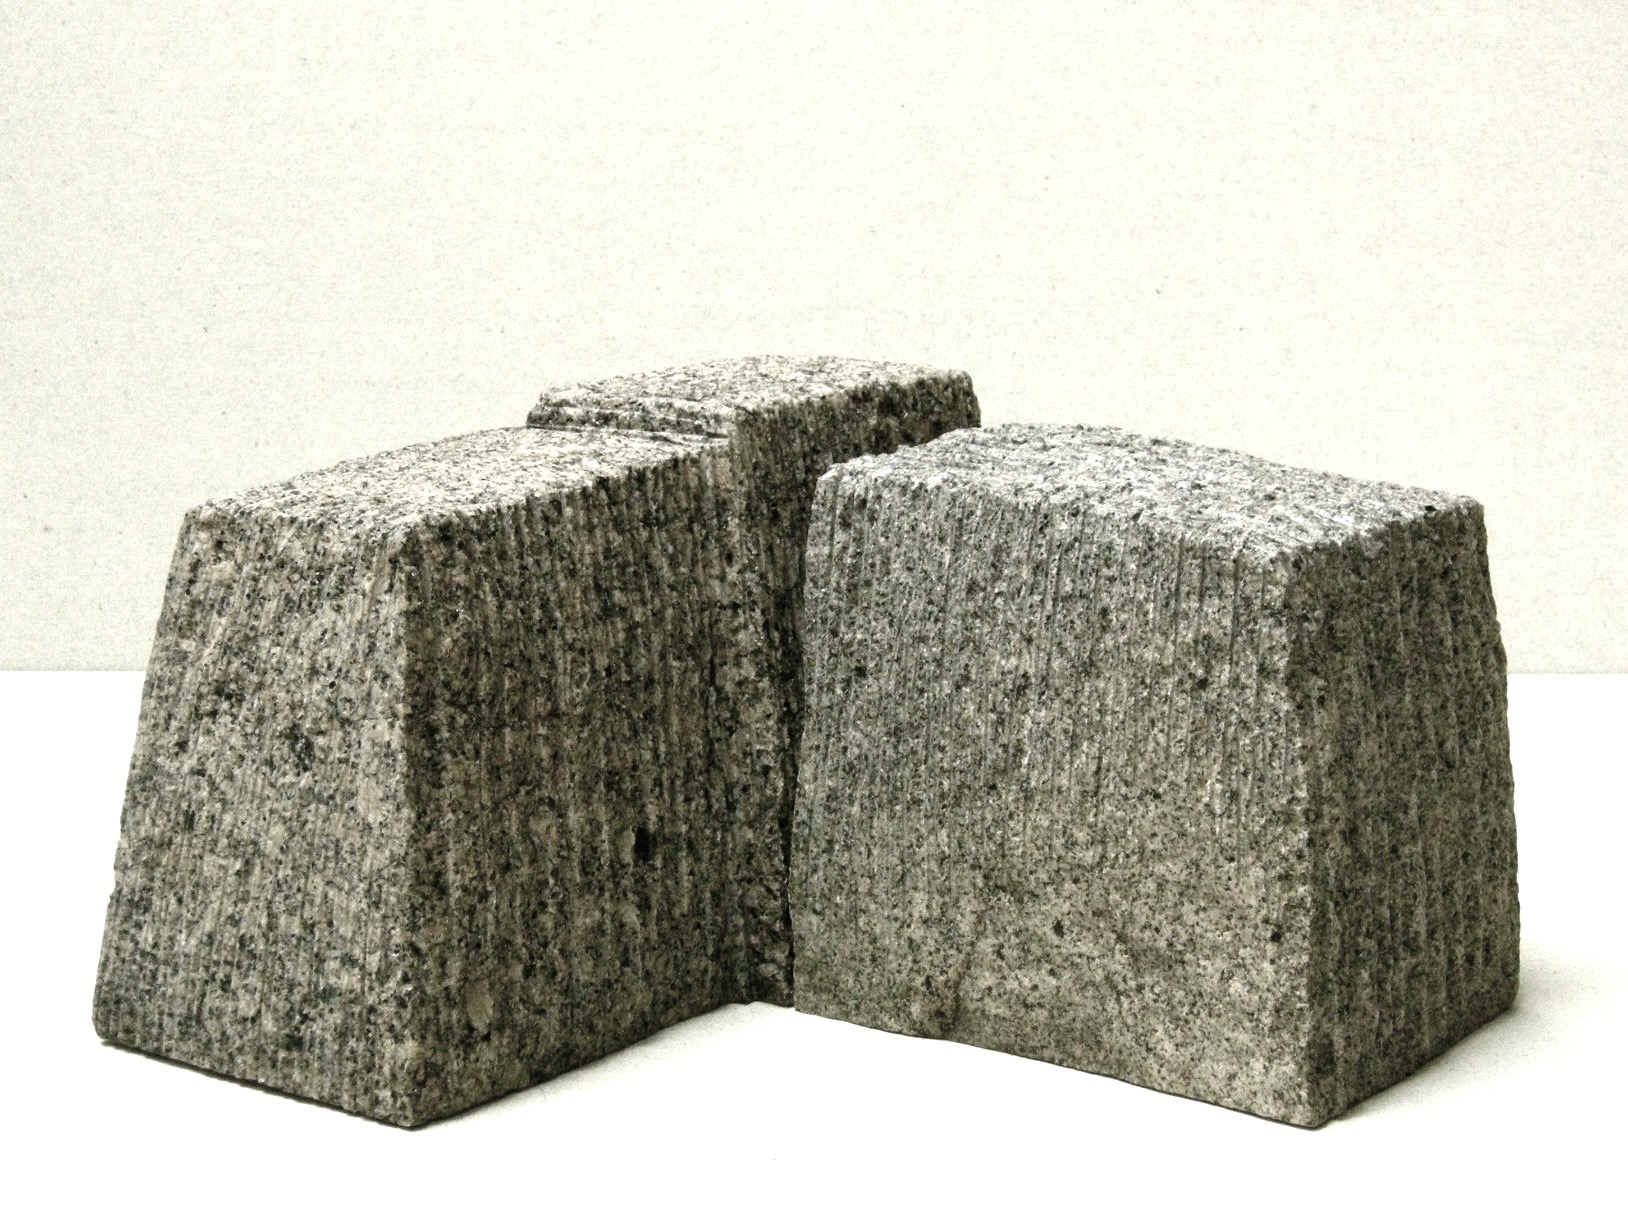 Connect, 2011, granite, heigth 25 cm